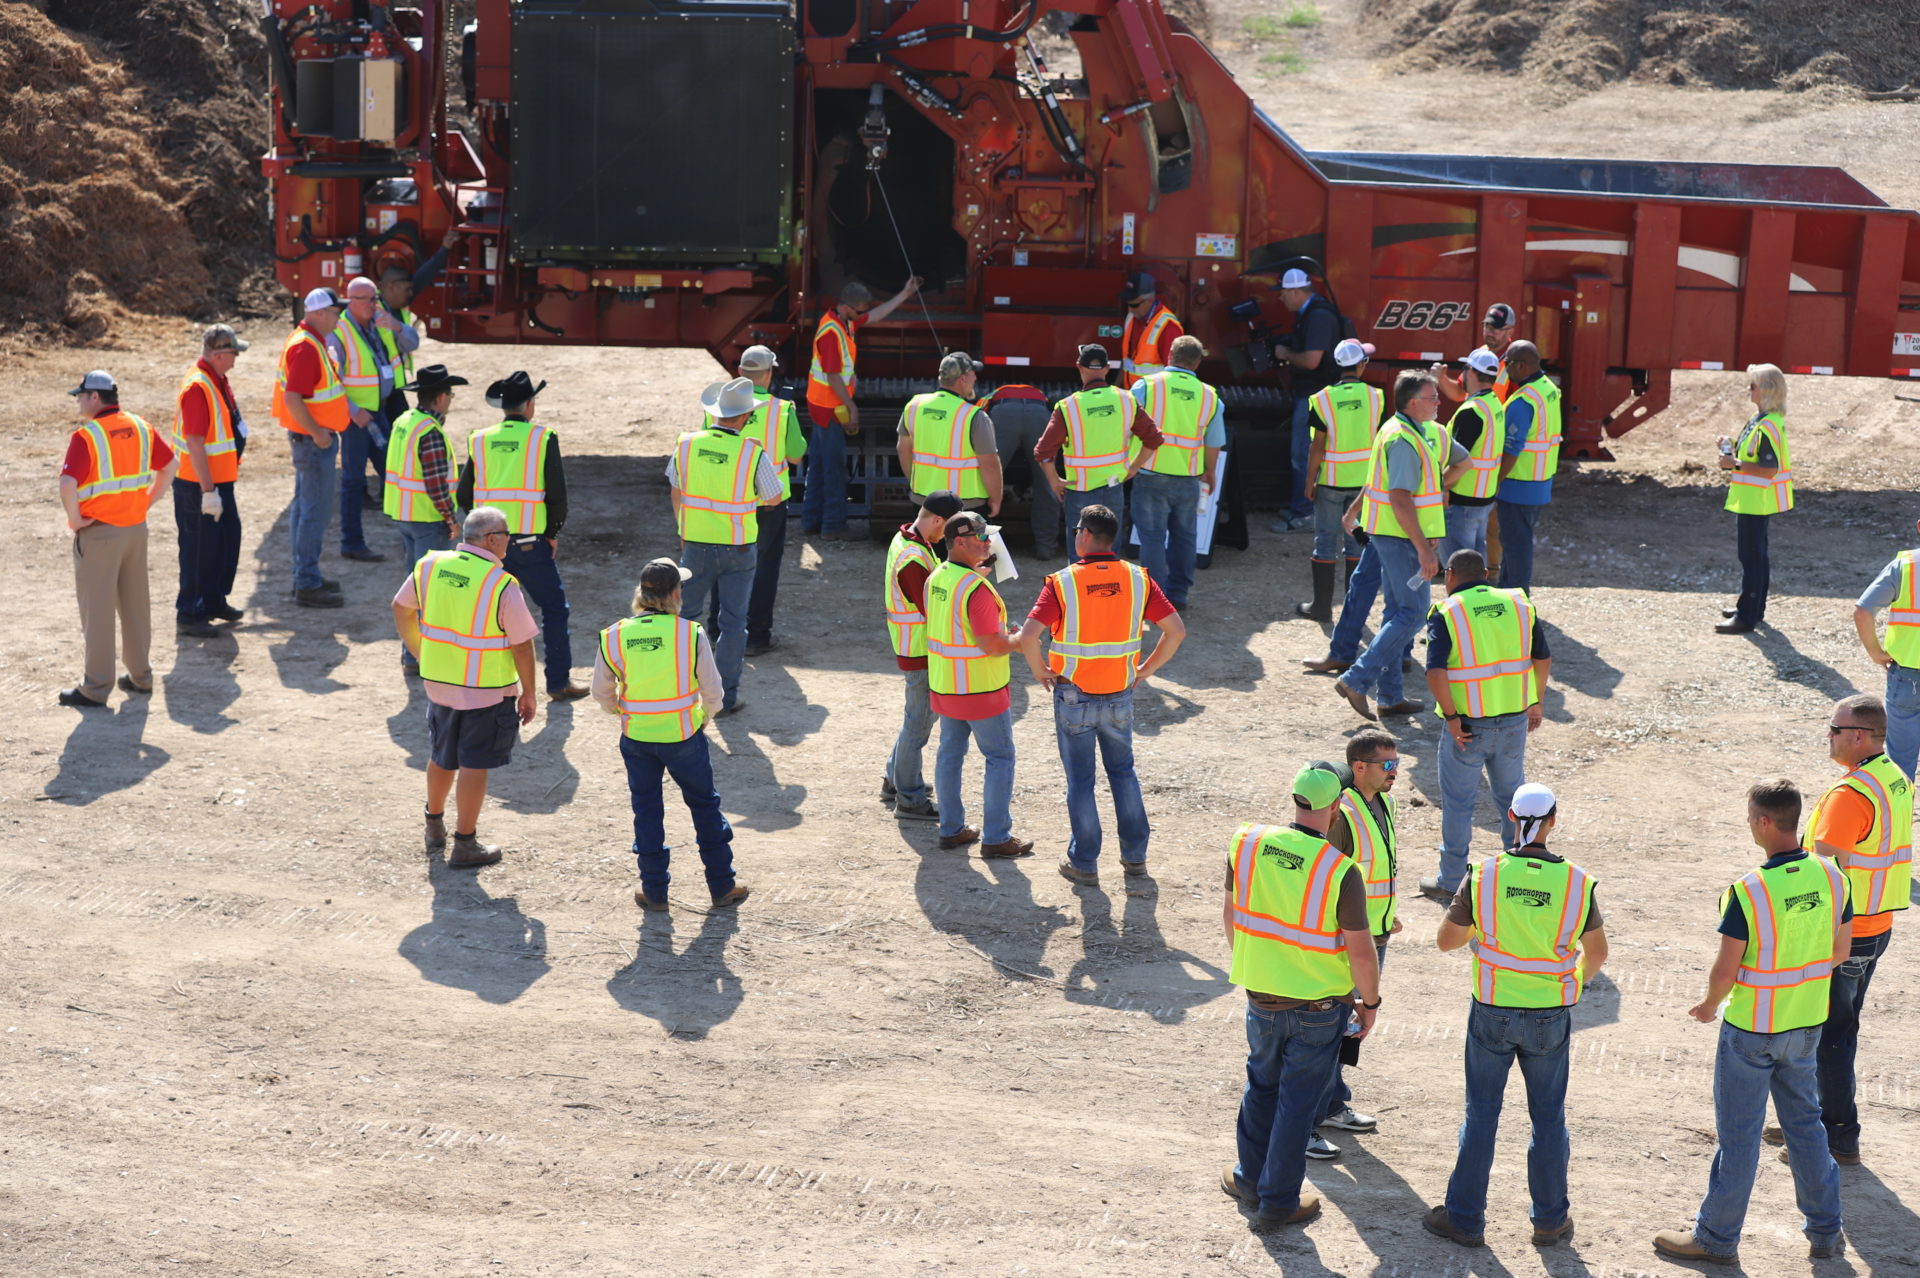 Crowd of men wearing safety vests surrounding a large horizontal grinder at Rotochopper's field day event.